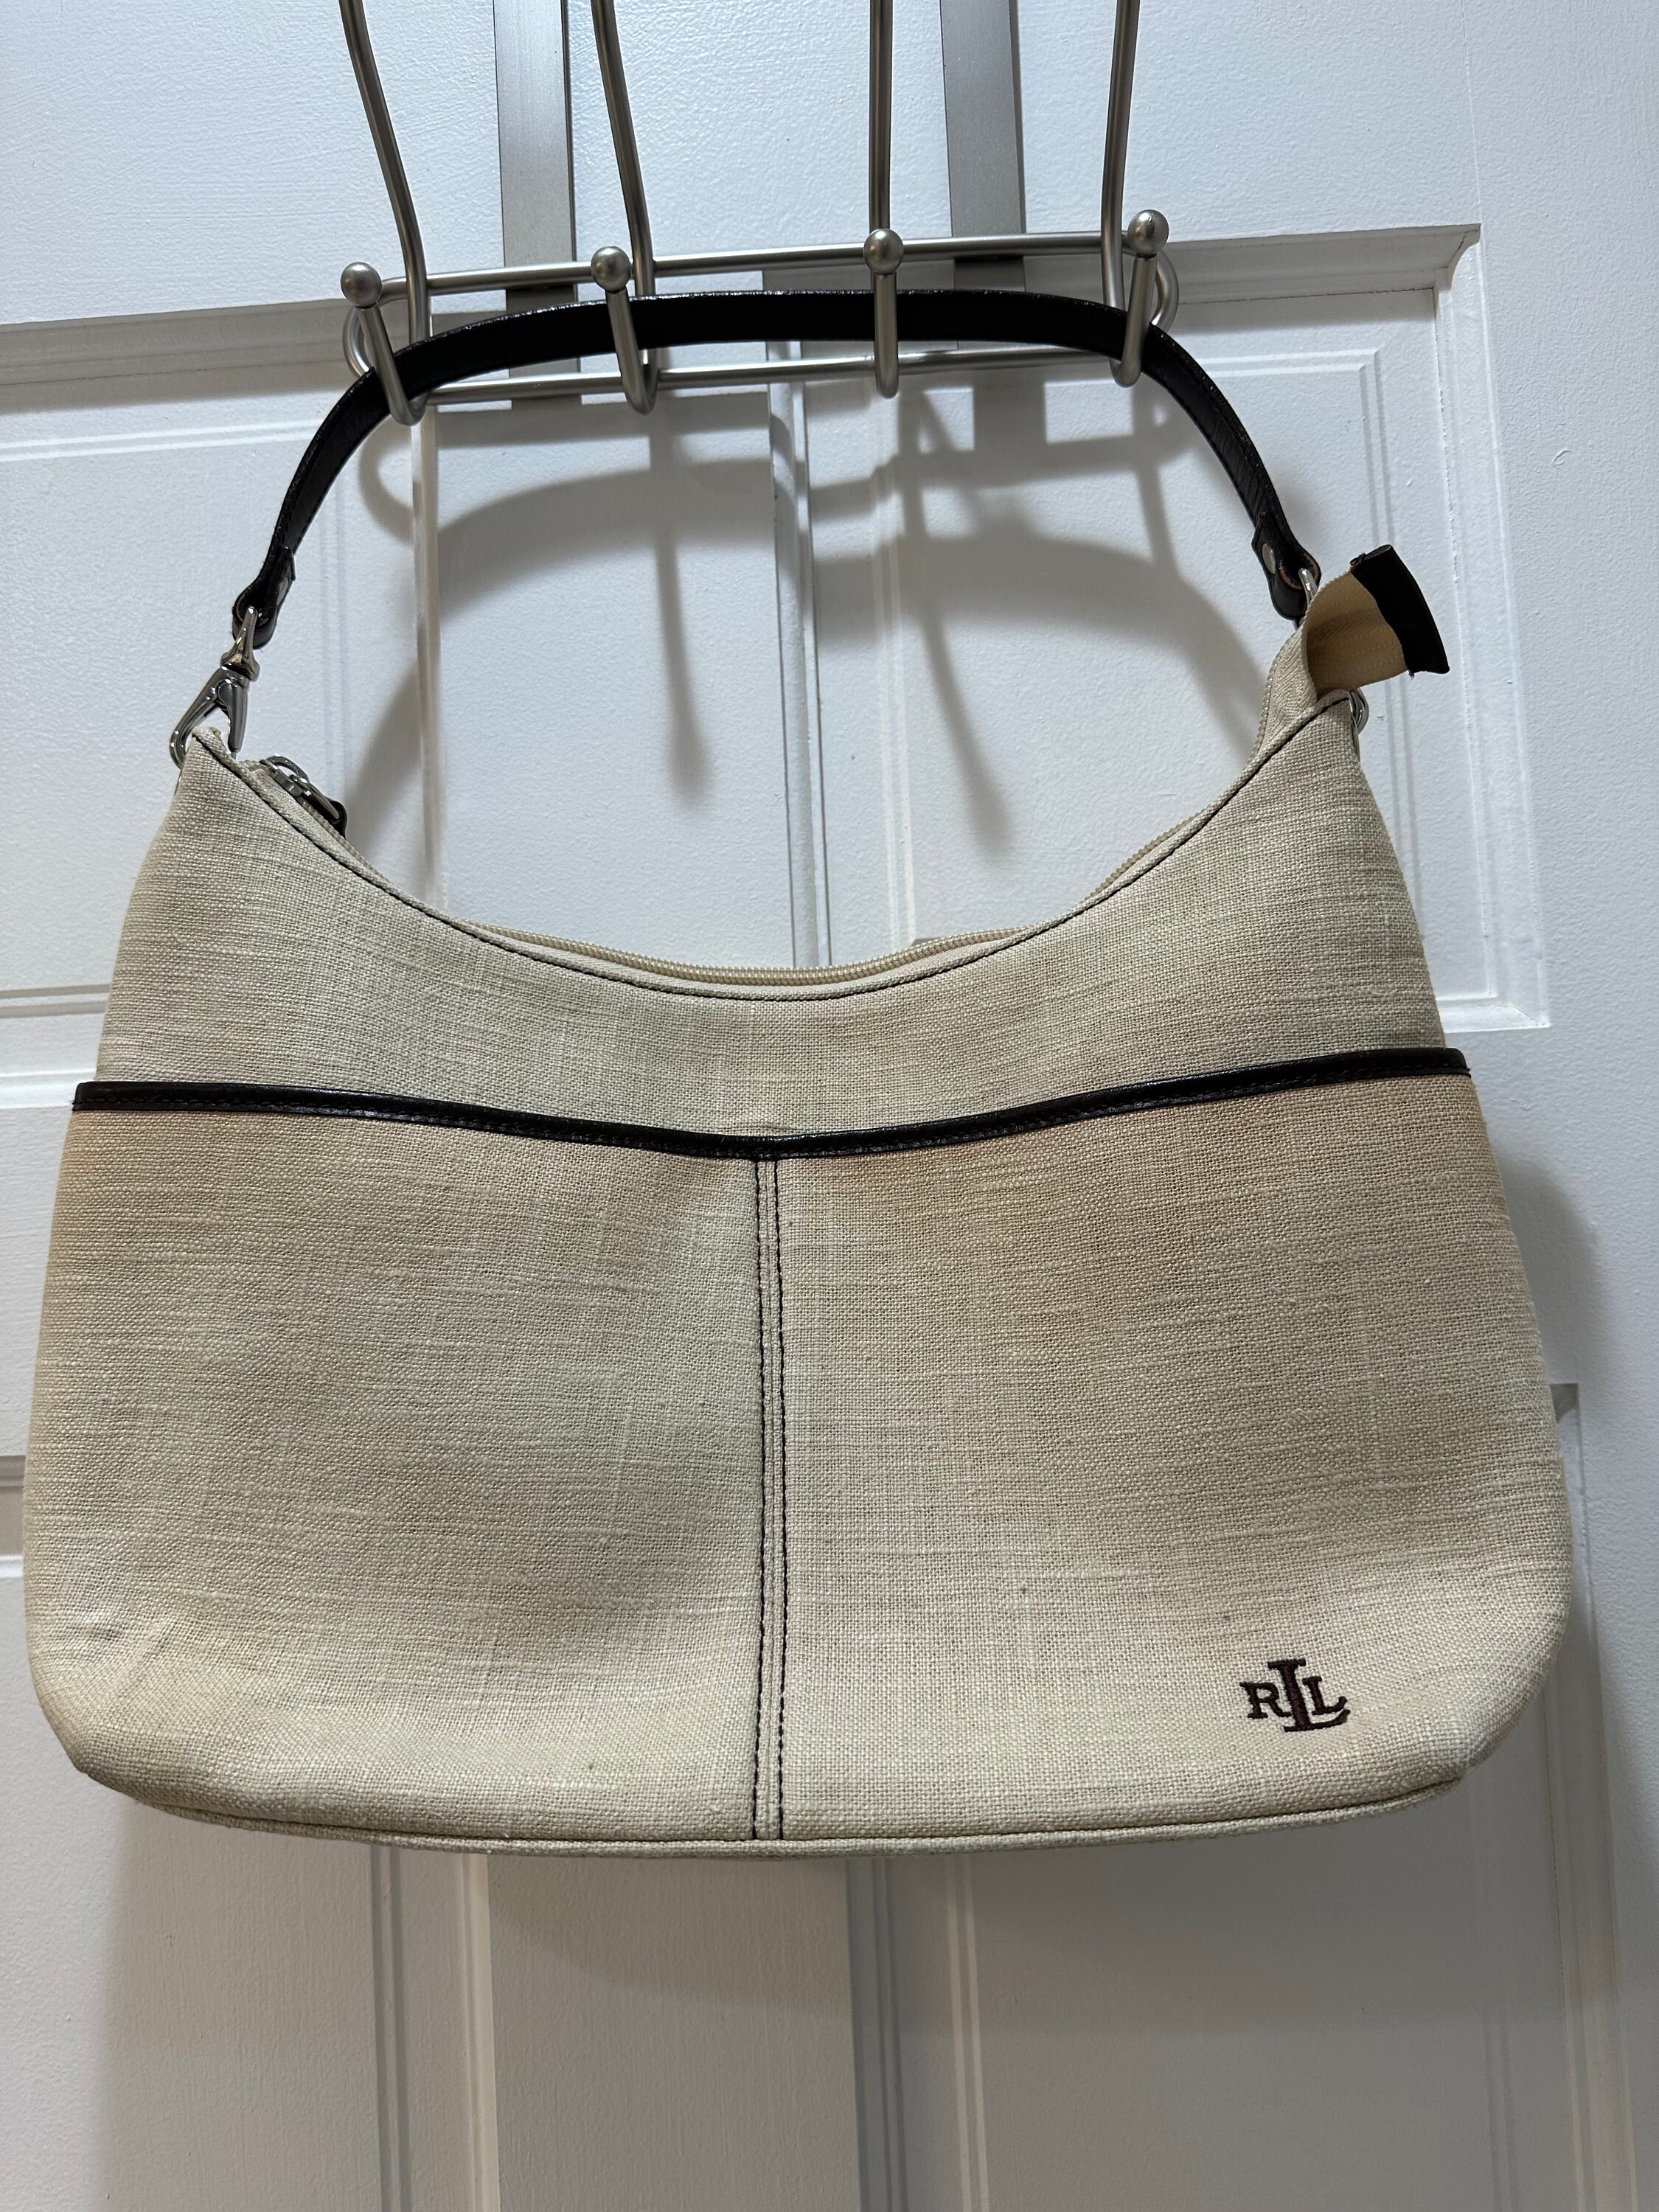 BUY New ralph lauren purses And Get One Free Guess Purse